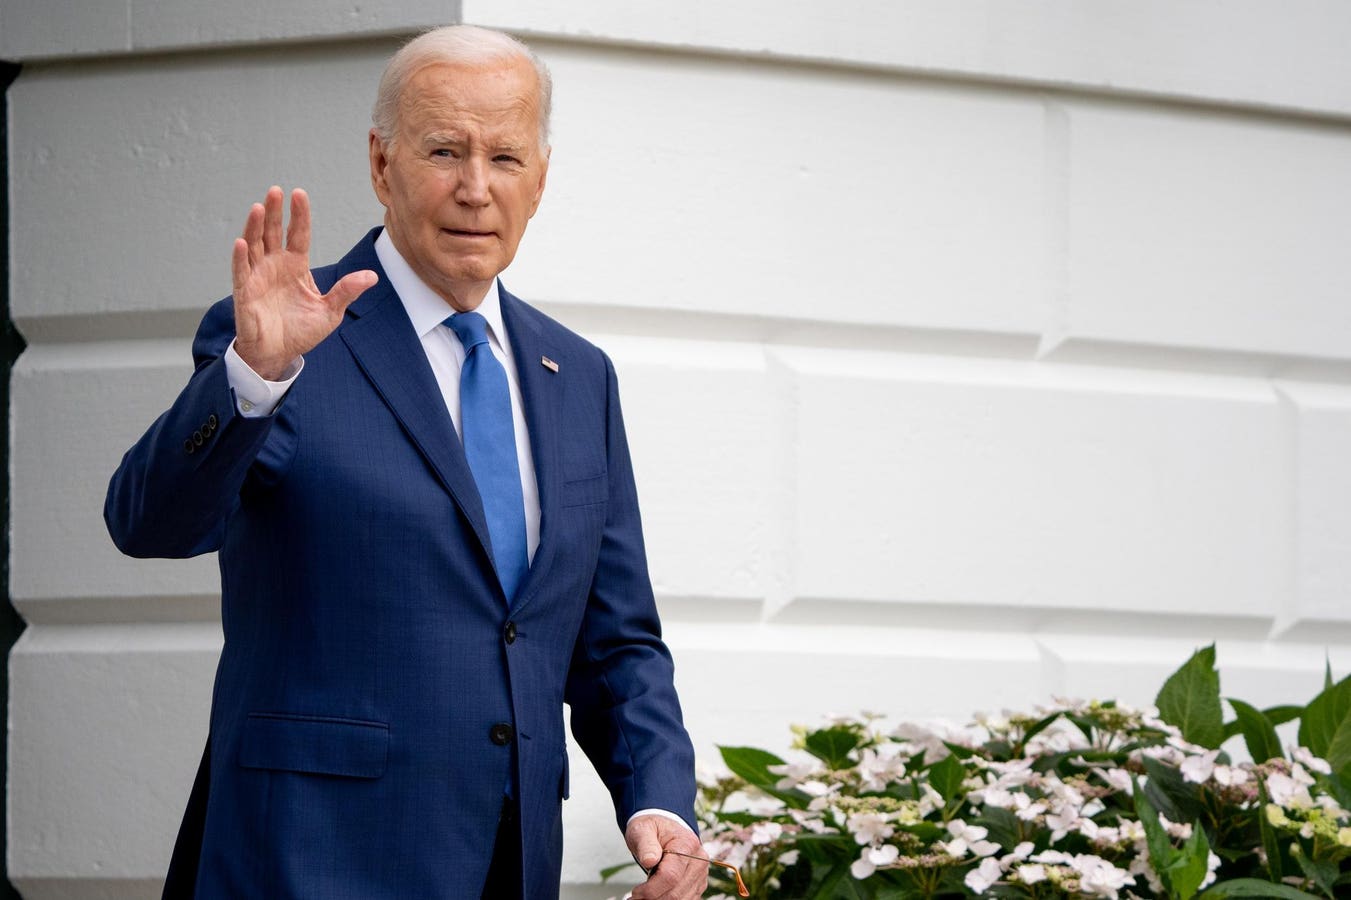 Biden Goes “Over The Top” In Latest Offensive Of The War Over Obamacare